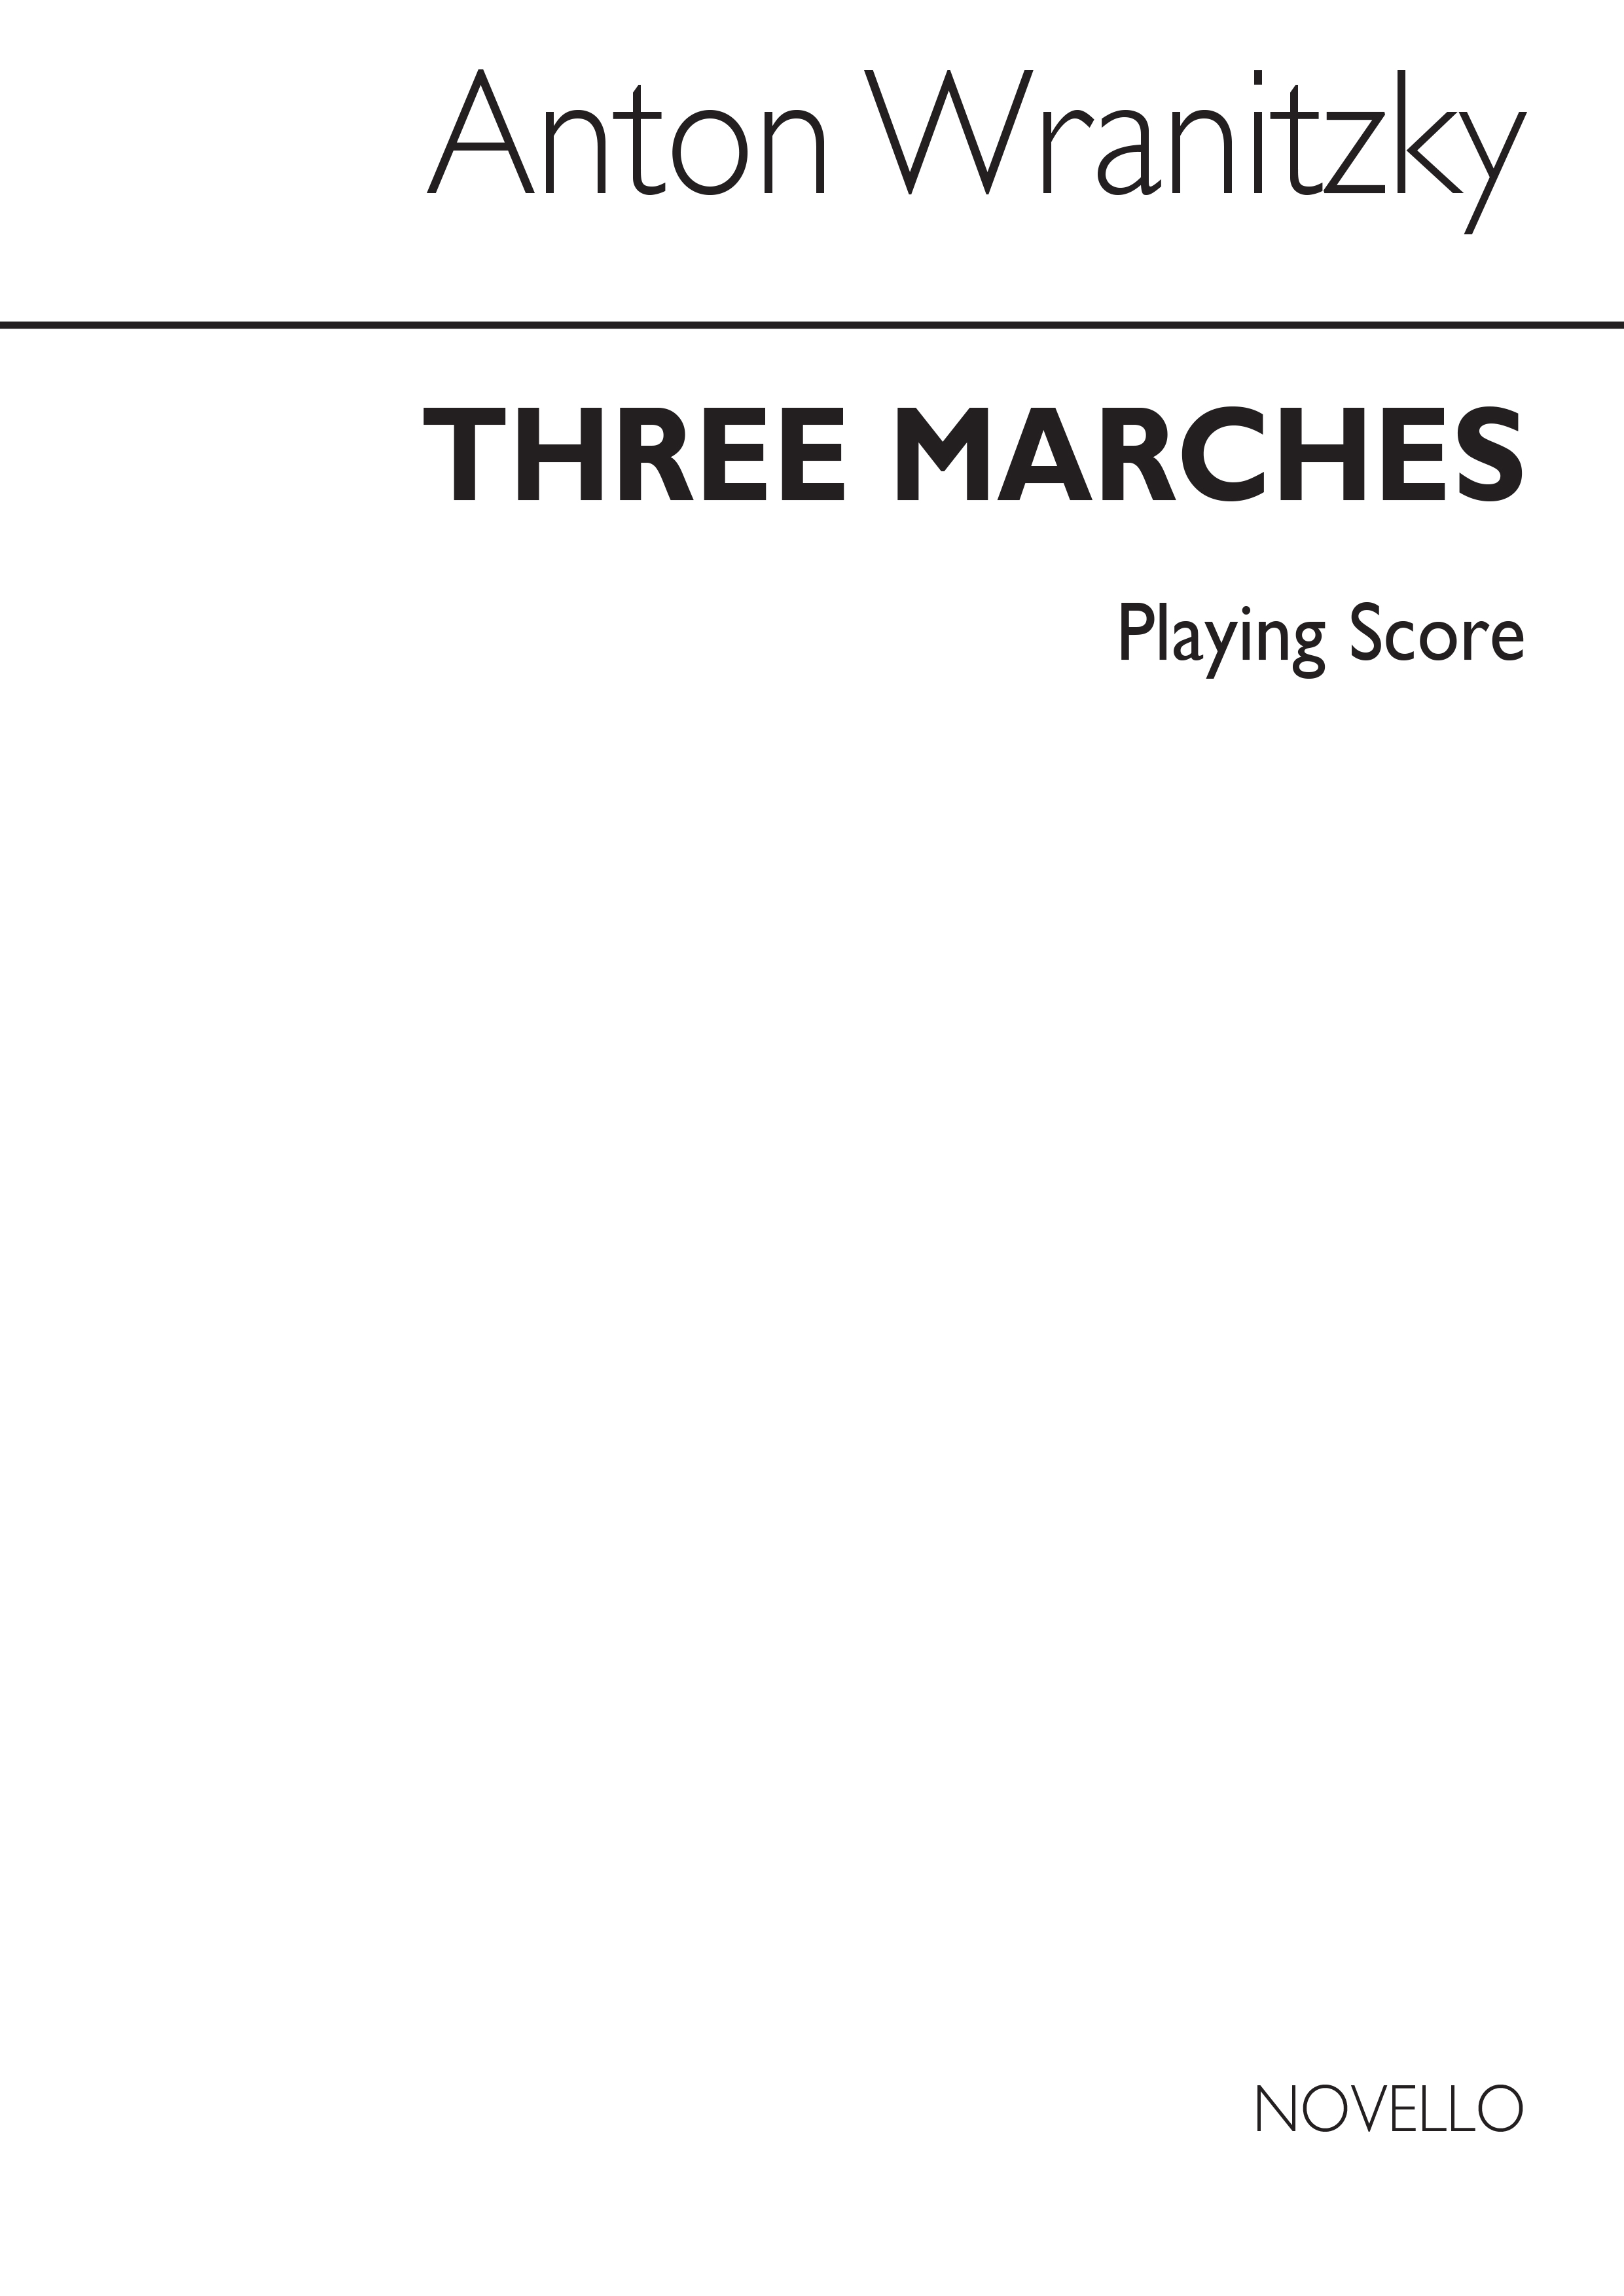 Wranitzky: Three Marches for Three Clarinets (Player's Score)